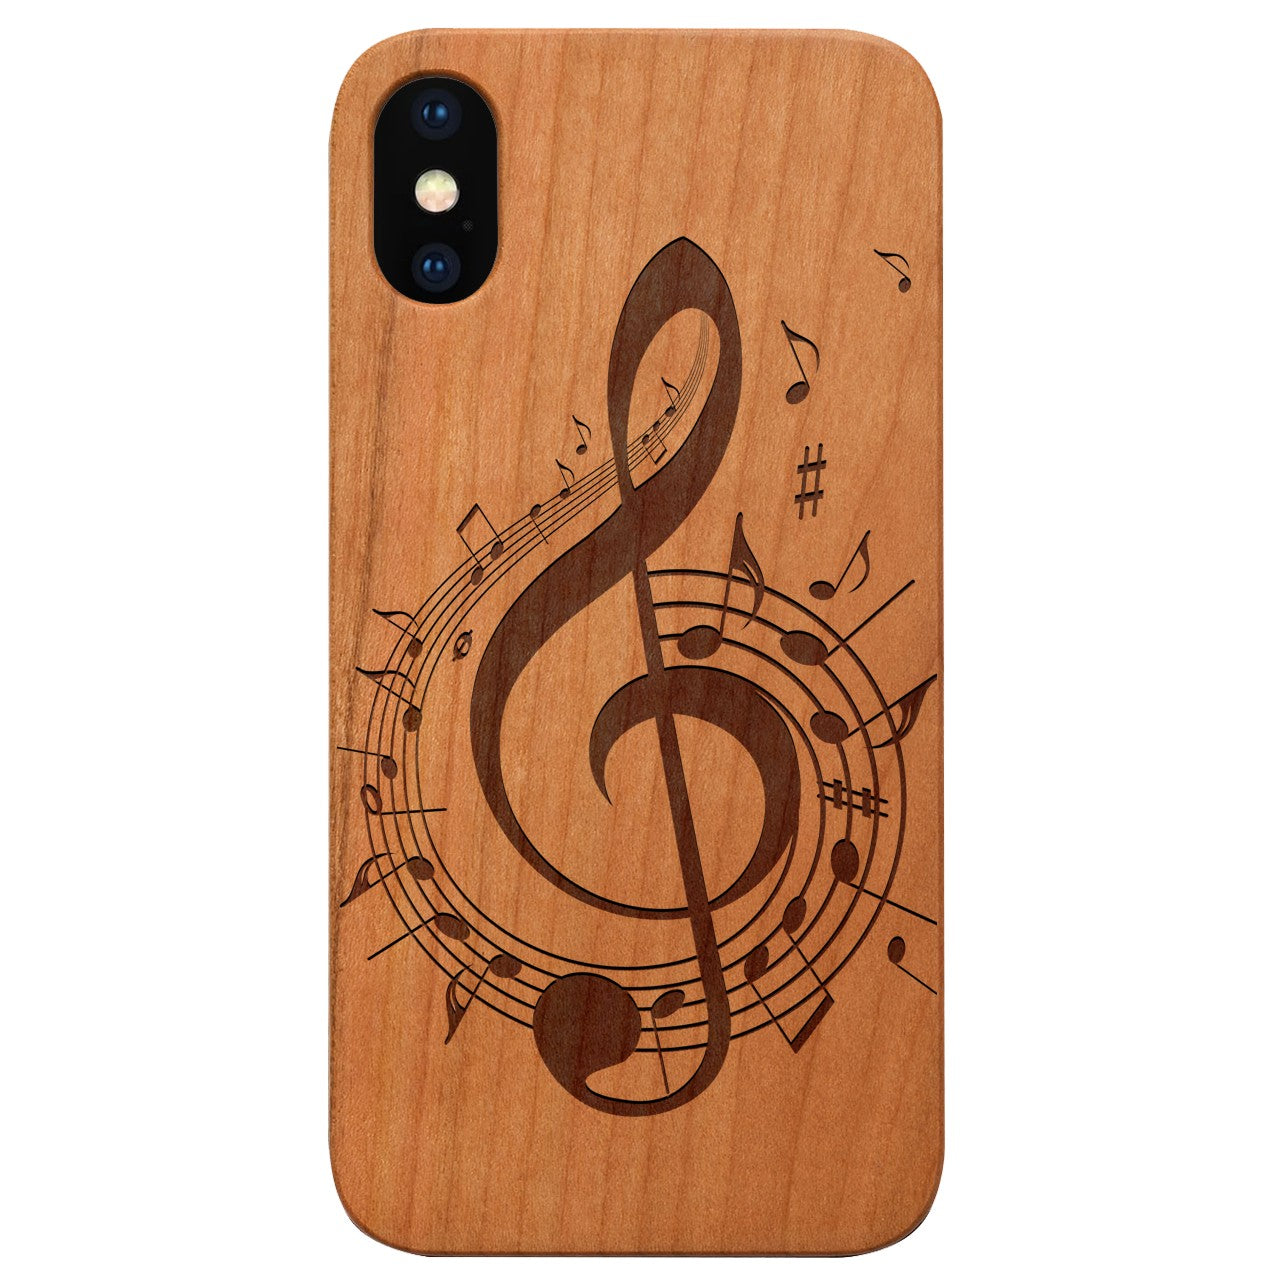  Clef 4 - Engraved - Wooden Phone Case - IPhone 13 Models